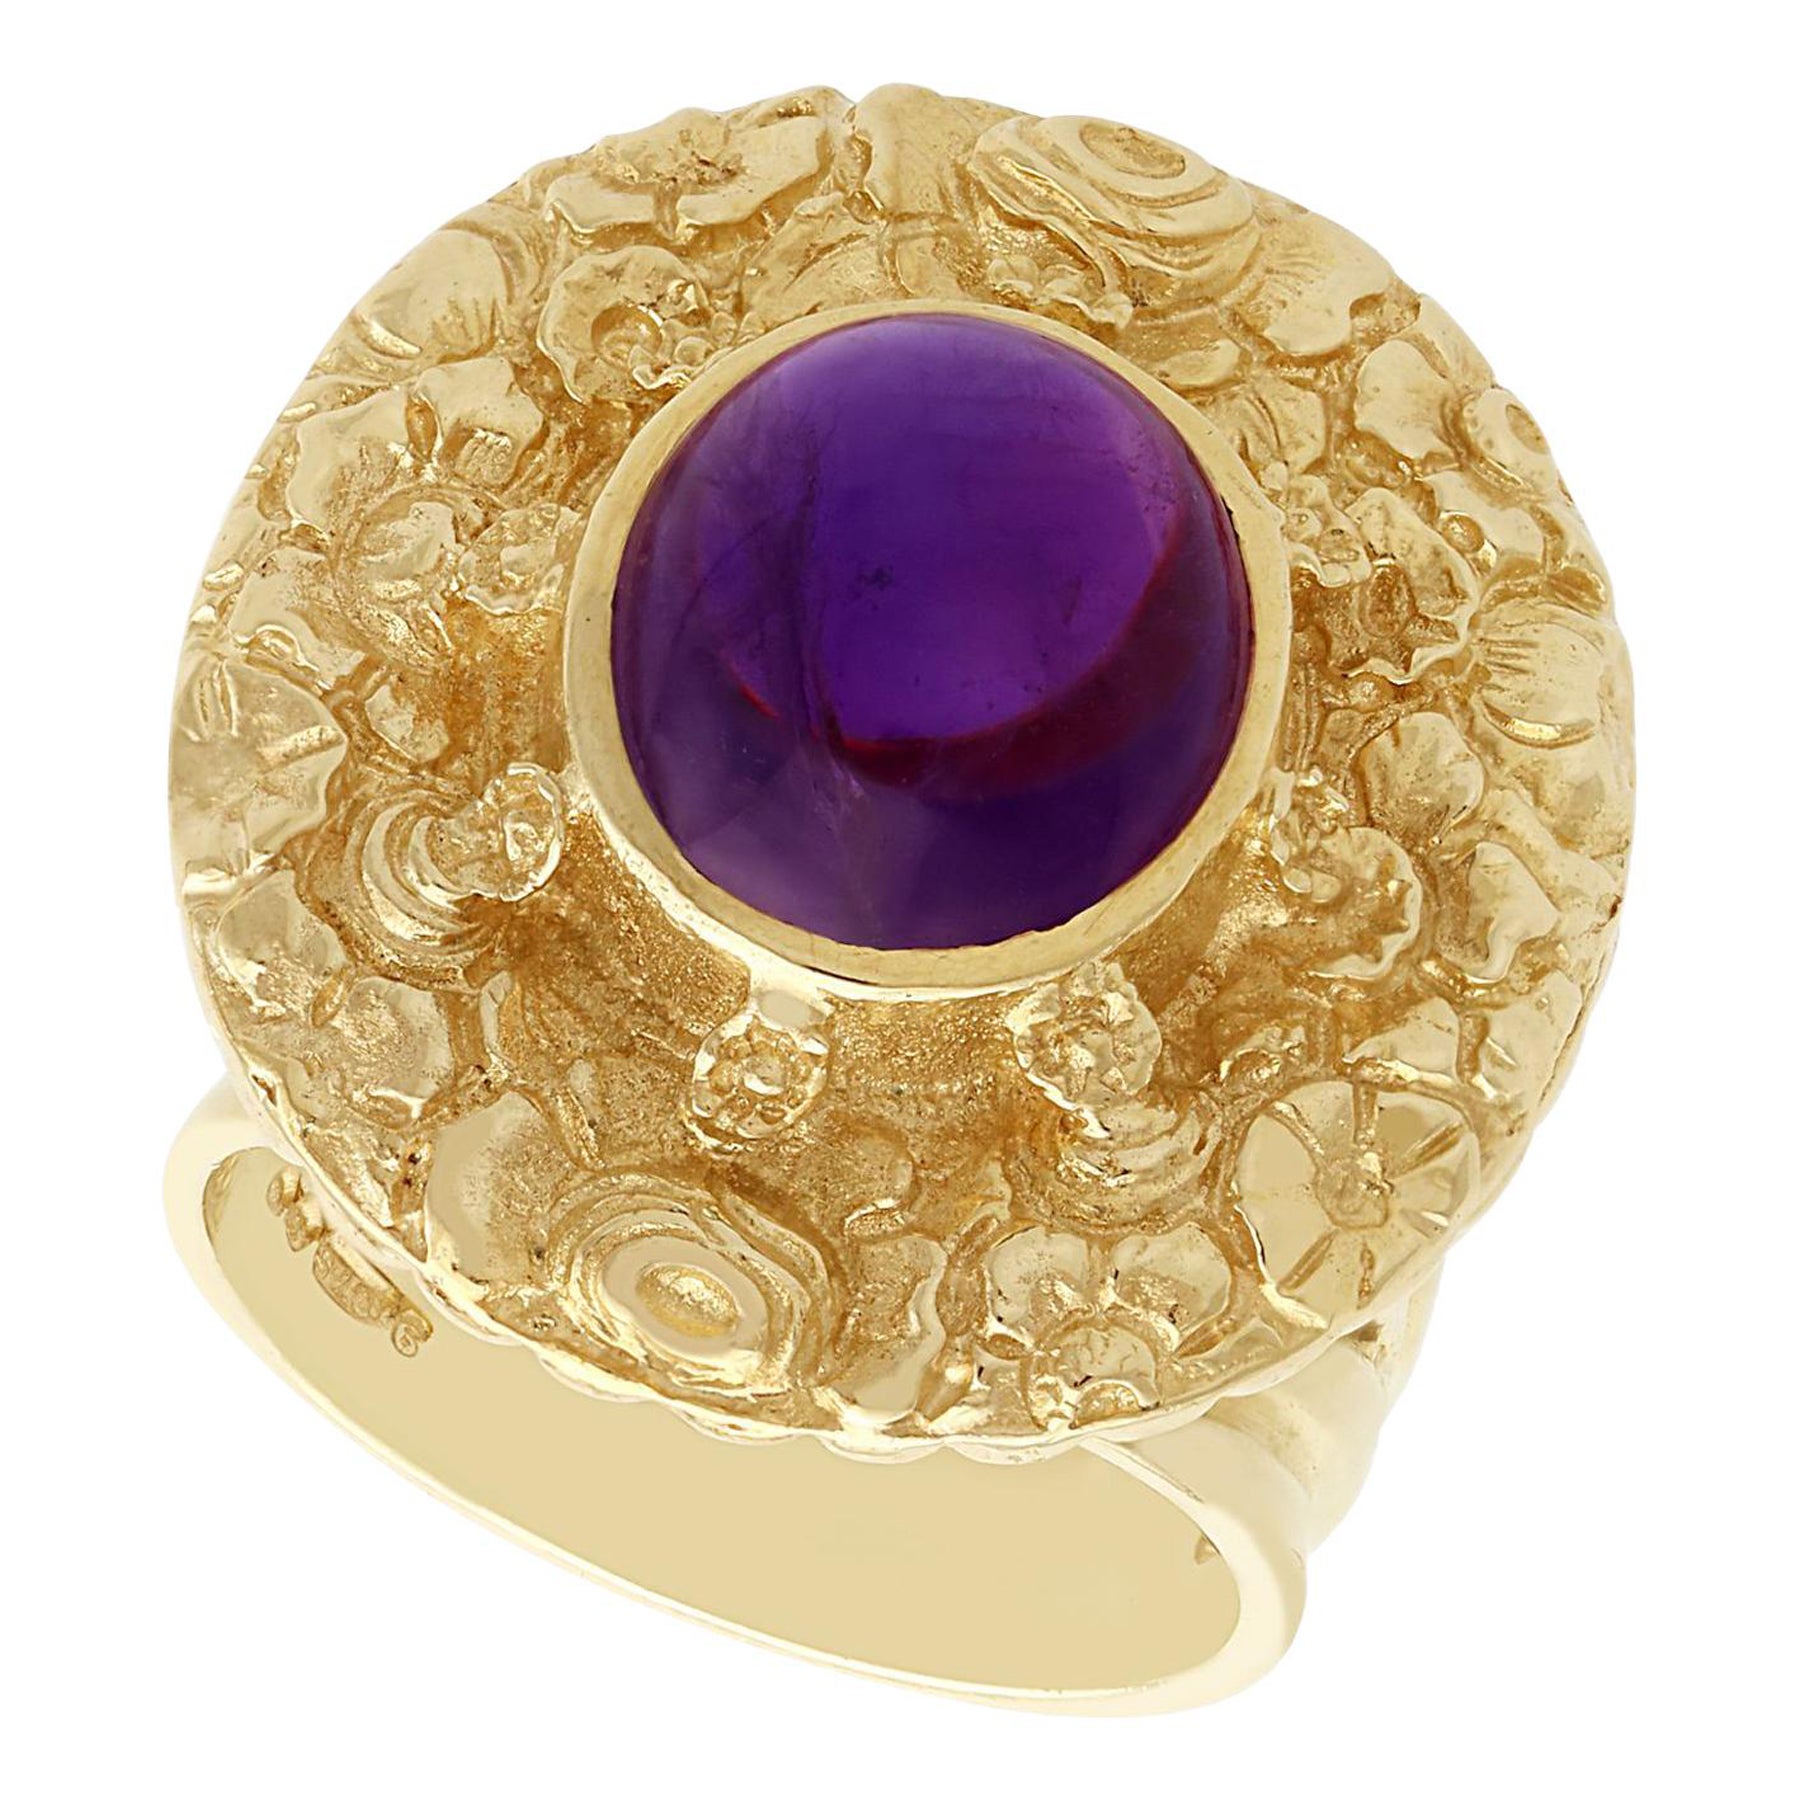 Vintage 1970s 3.77 Carat Amethyst and Yellow Gold Cocktail Ring